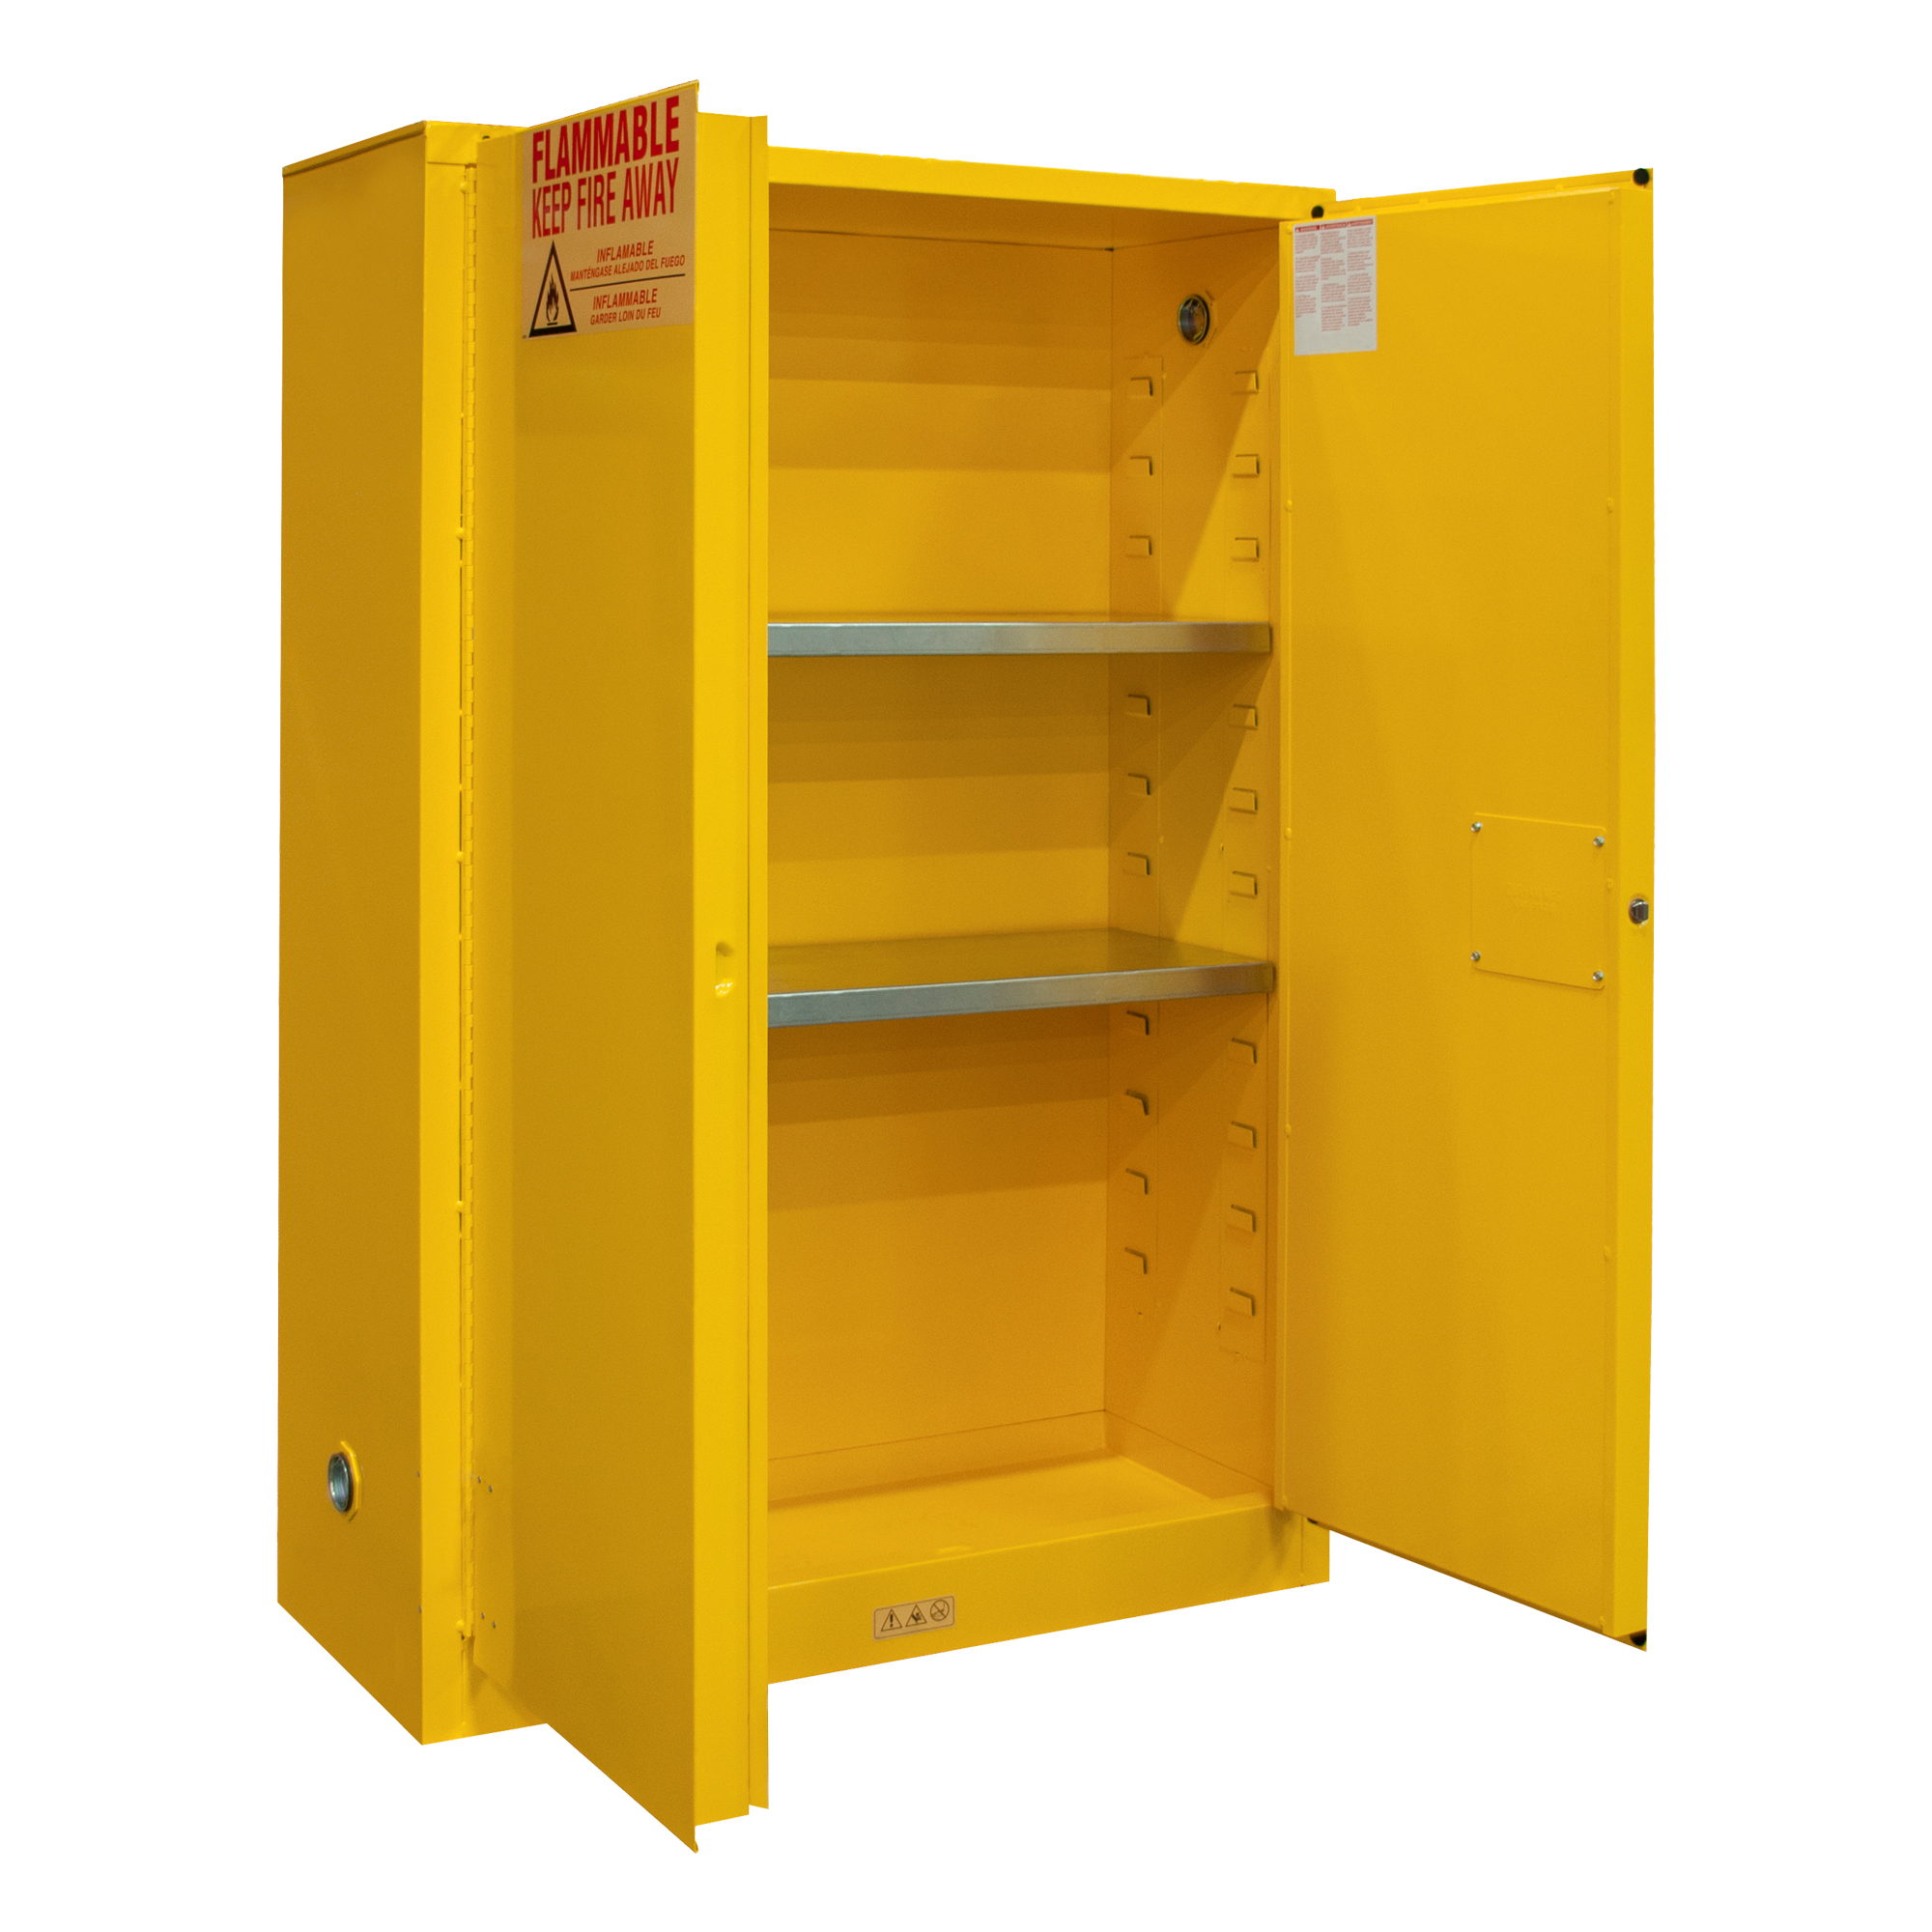 Yellow Powder Coat Finish 30 gallons Capacity Durham FM Approved 1030S-50 Welded 16 Gauge Steel Flammable Safety Self Closing Door Cabinet 18 Length x 43 Width x 45-3/8 Height 1 Shelves 